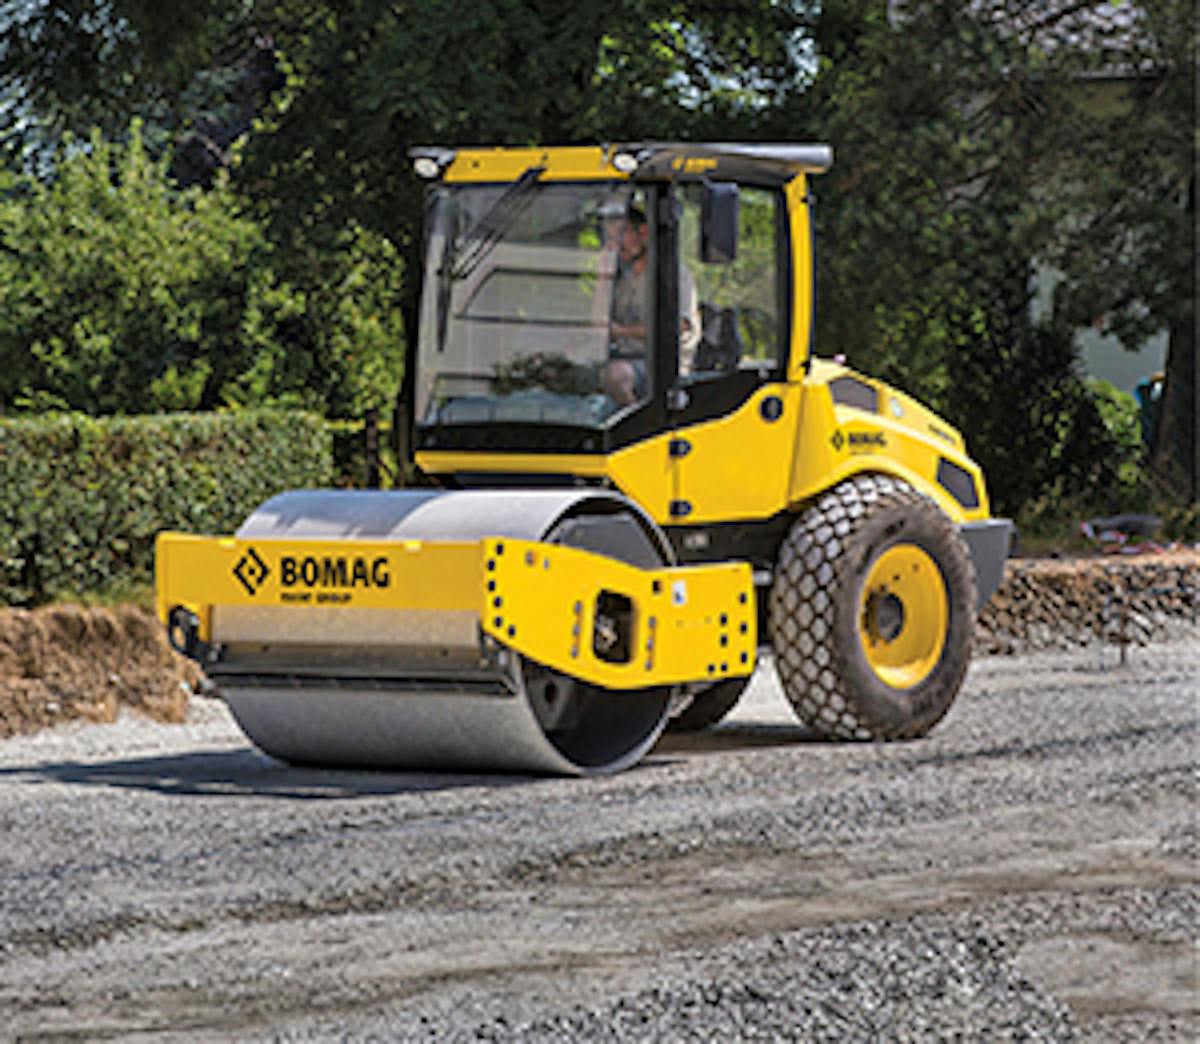 1 Different types of compactors: a) Pad-foot or tamping-foot